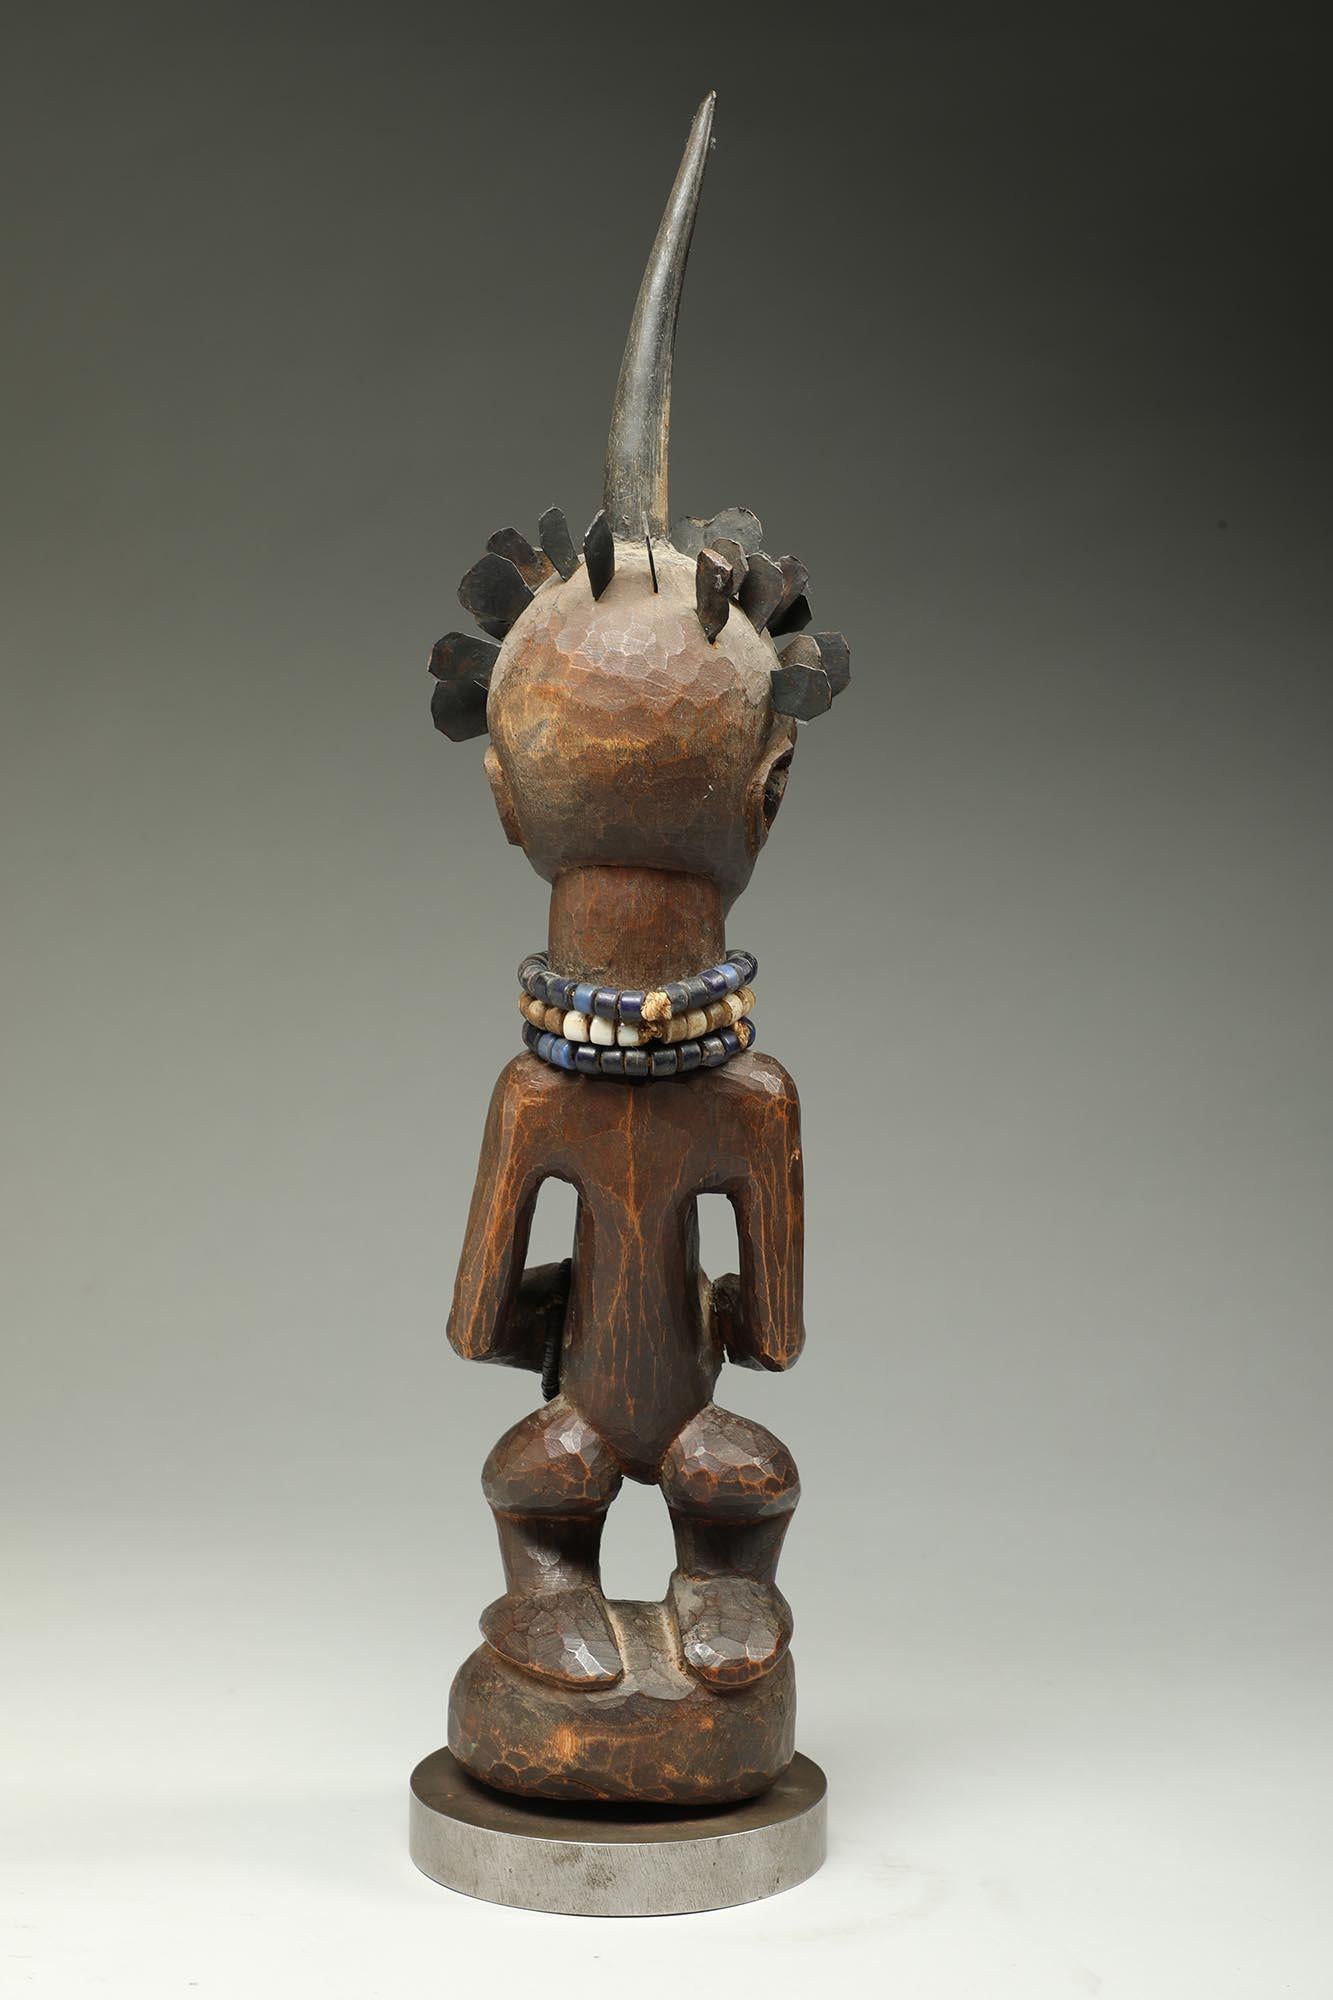 Carved wood standing female figure with projecting stomach, attached horn on top of head, and hair in form of small hand shaped copper pieces. Old glass beads around arm and neck.
It is in good condition wear and erosion from traditional use,